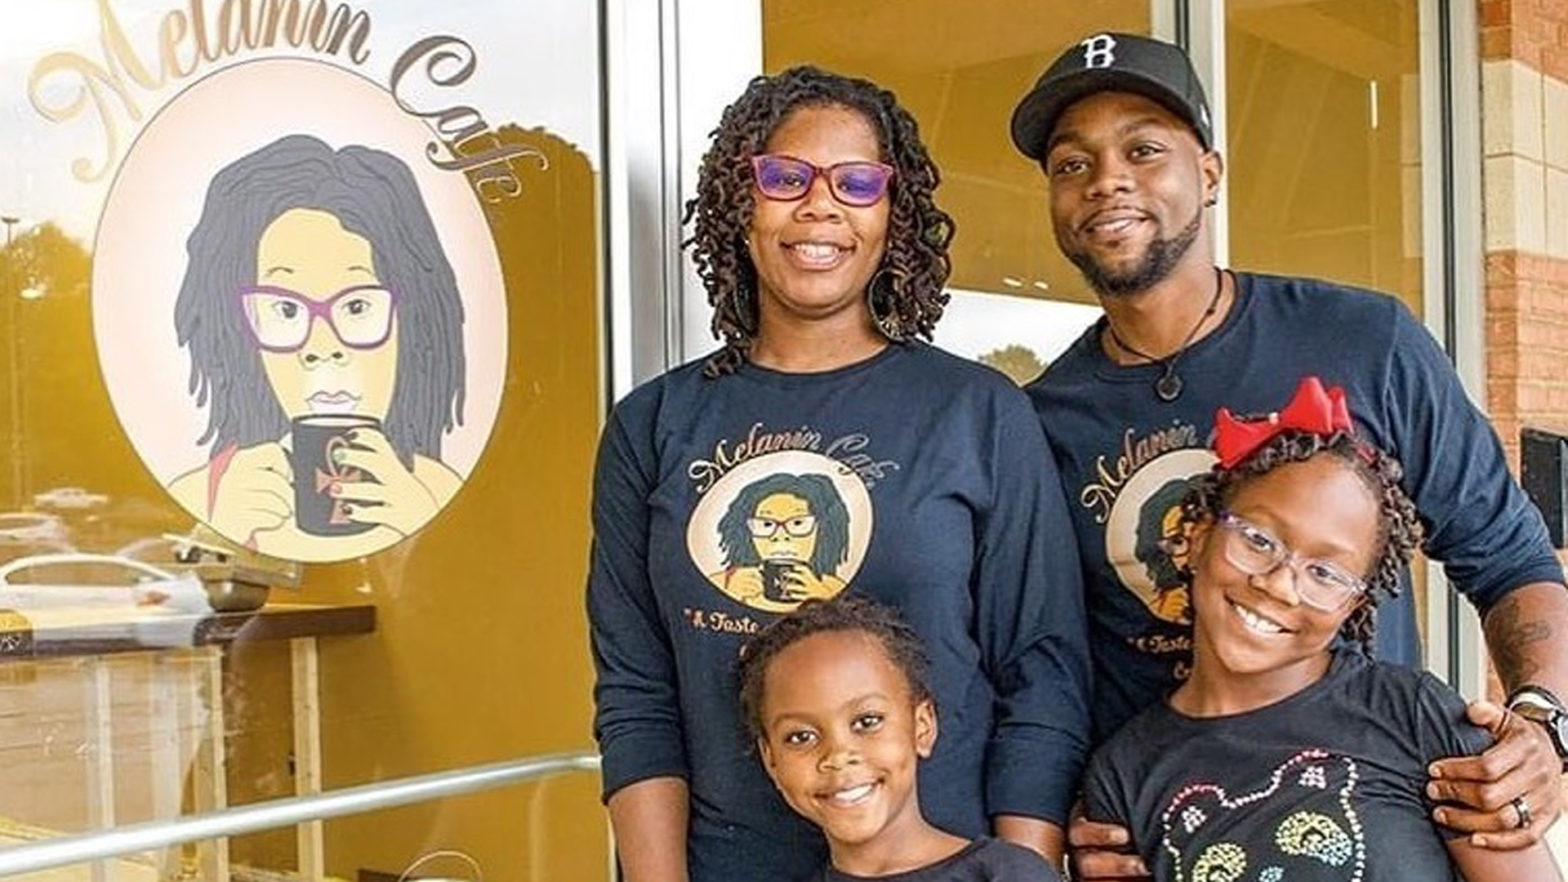 Black History & Coffee Are Served In Equal Measure In This Alabama Café